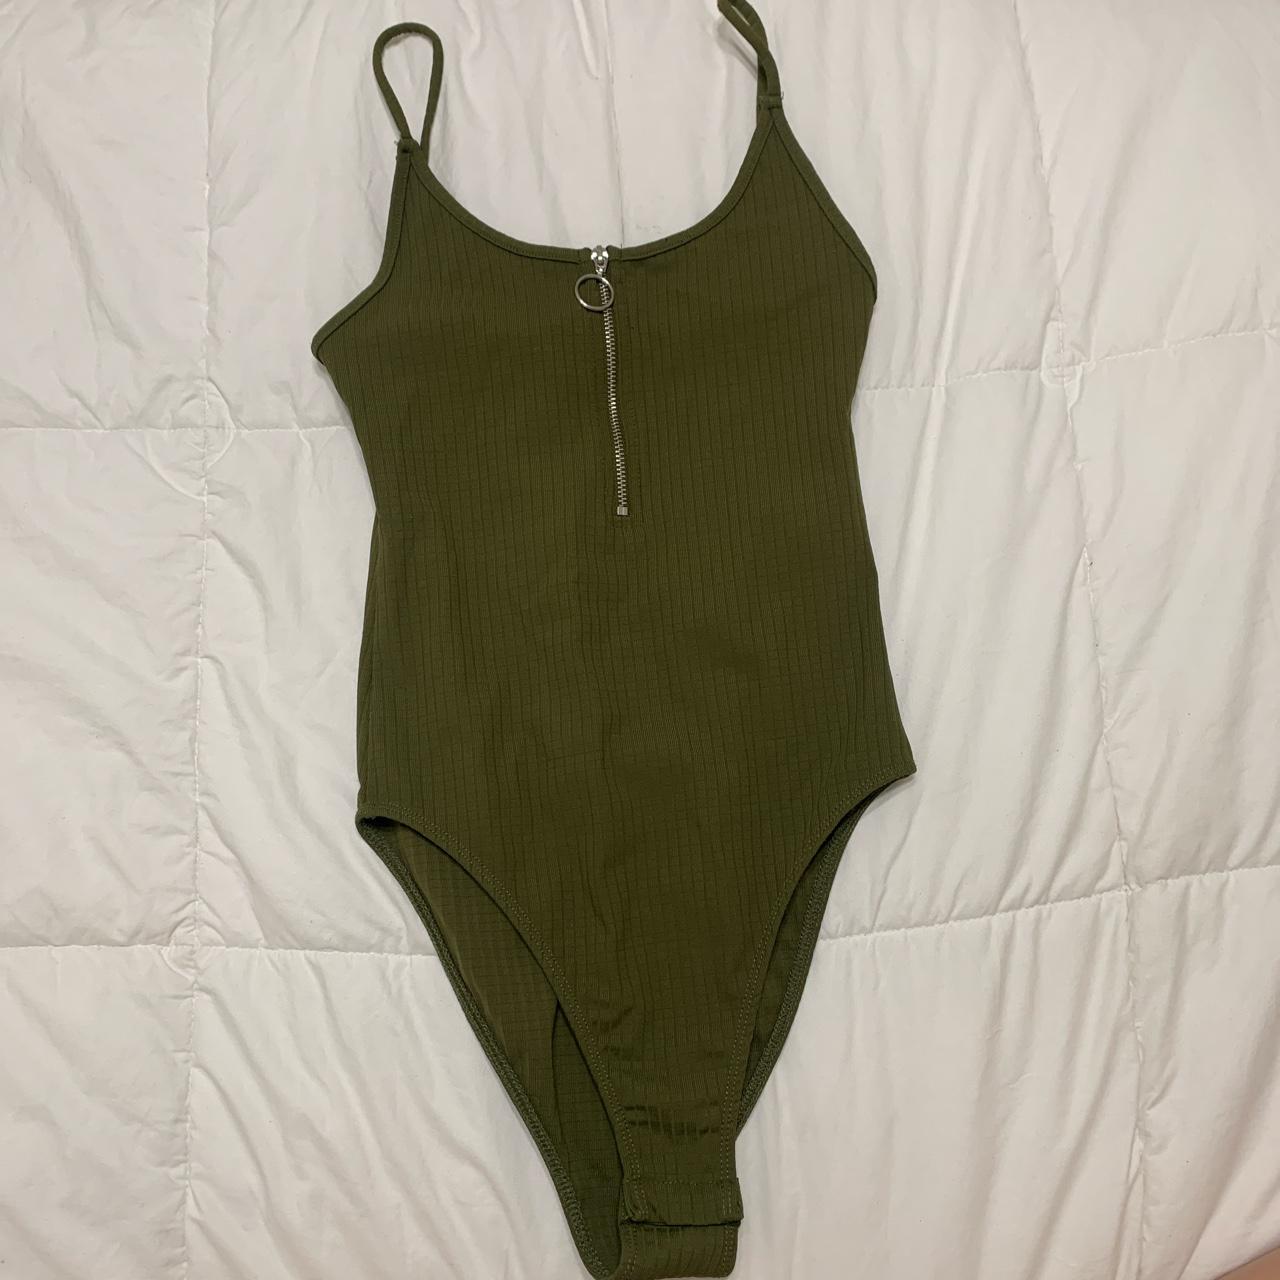 Product Image 2 - TOPSHOP ARMY GREEN BODYSUIT✨💛US 4

Cute,